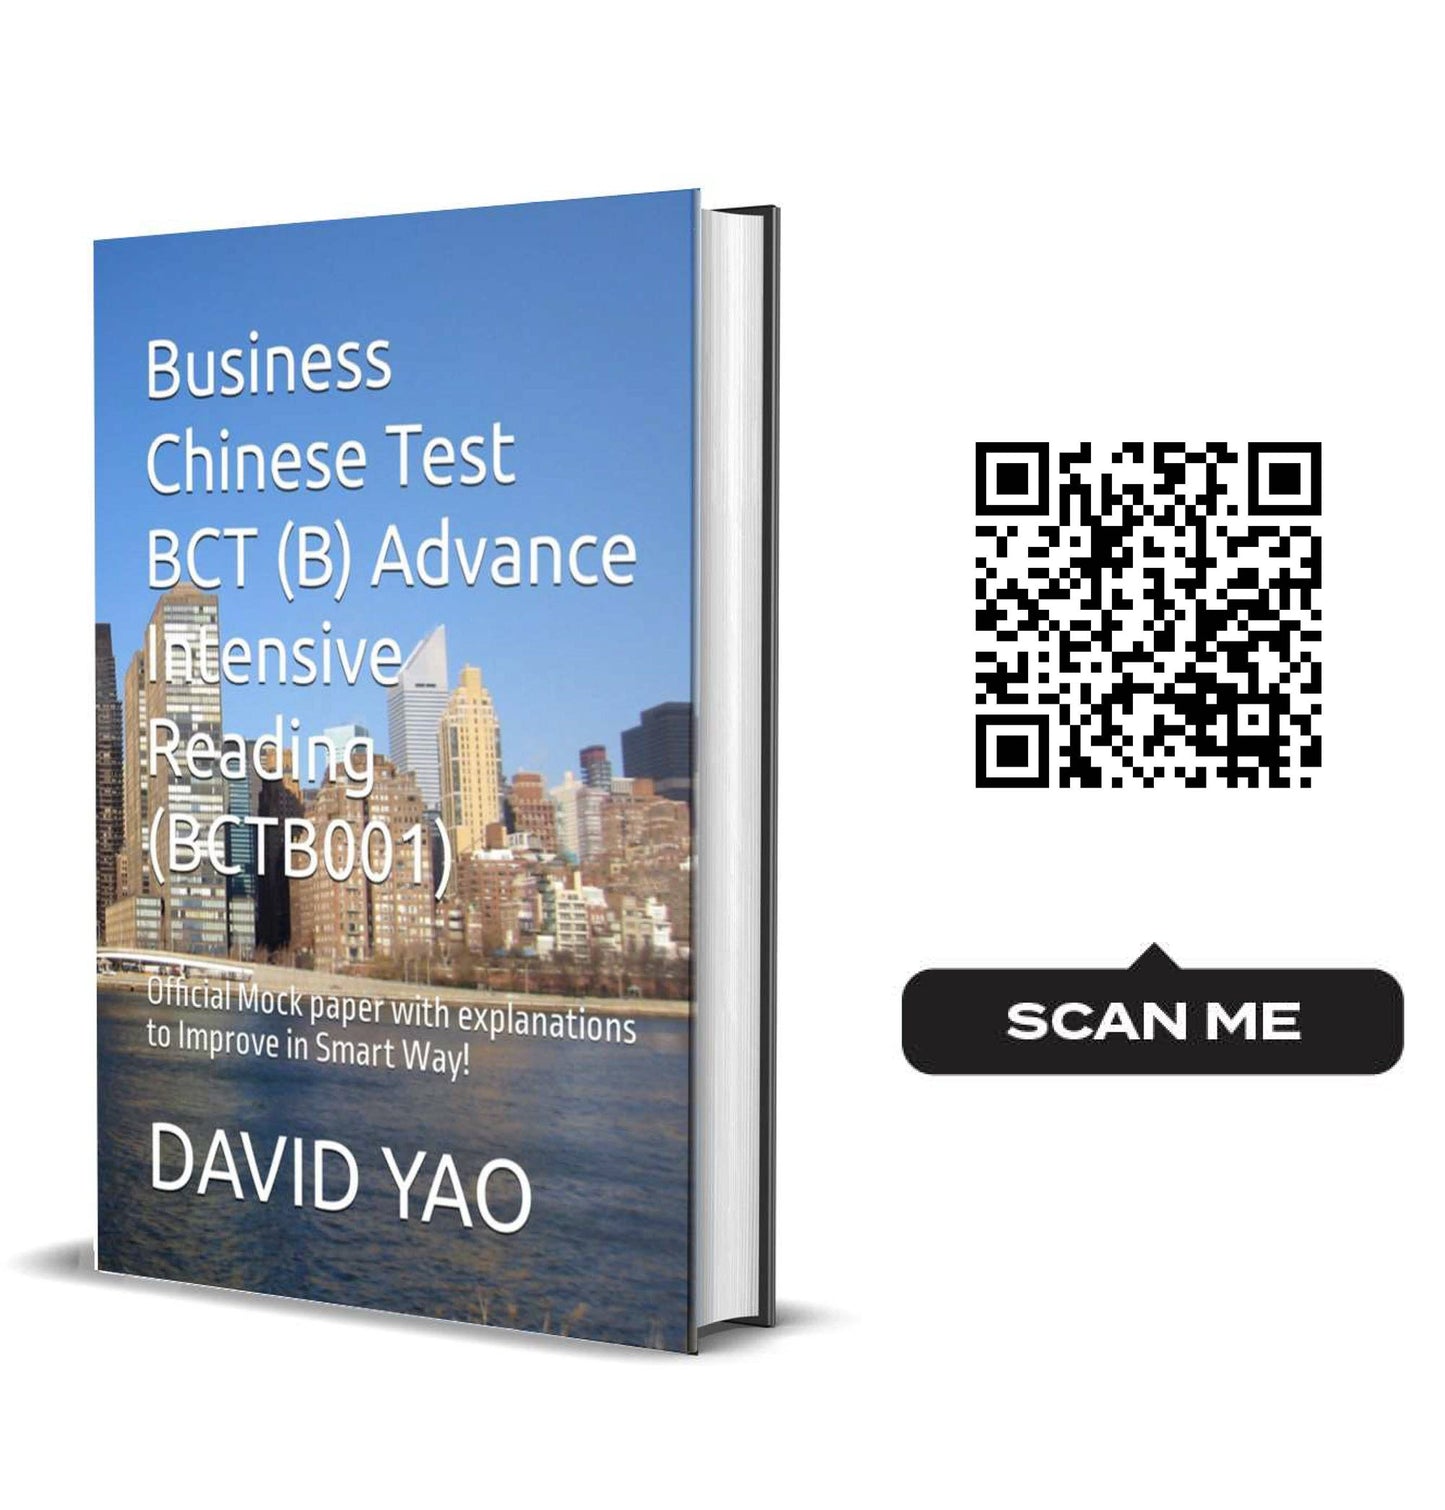 Business Chinese Test BCT (B) (BCTB001)